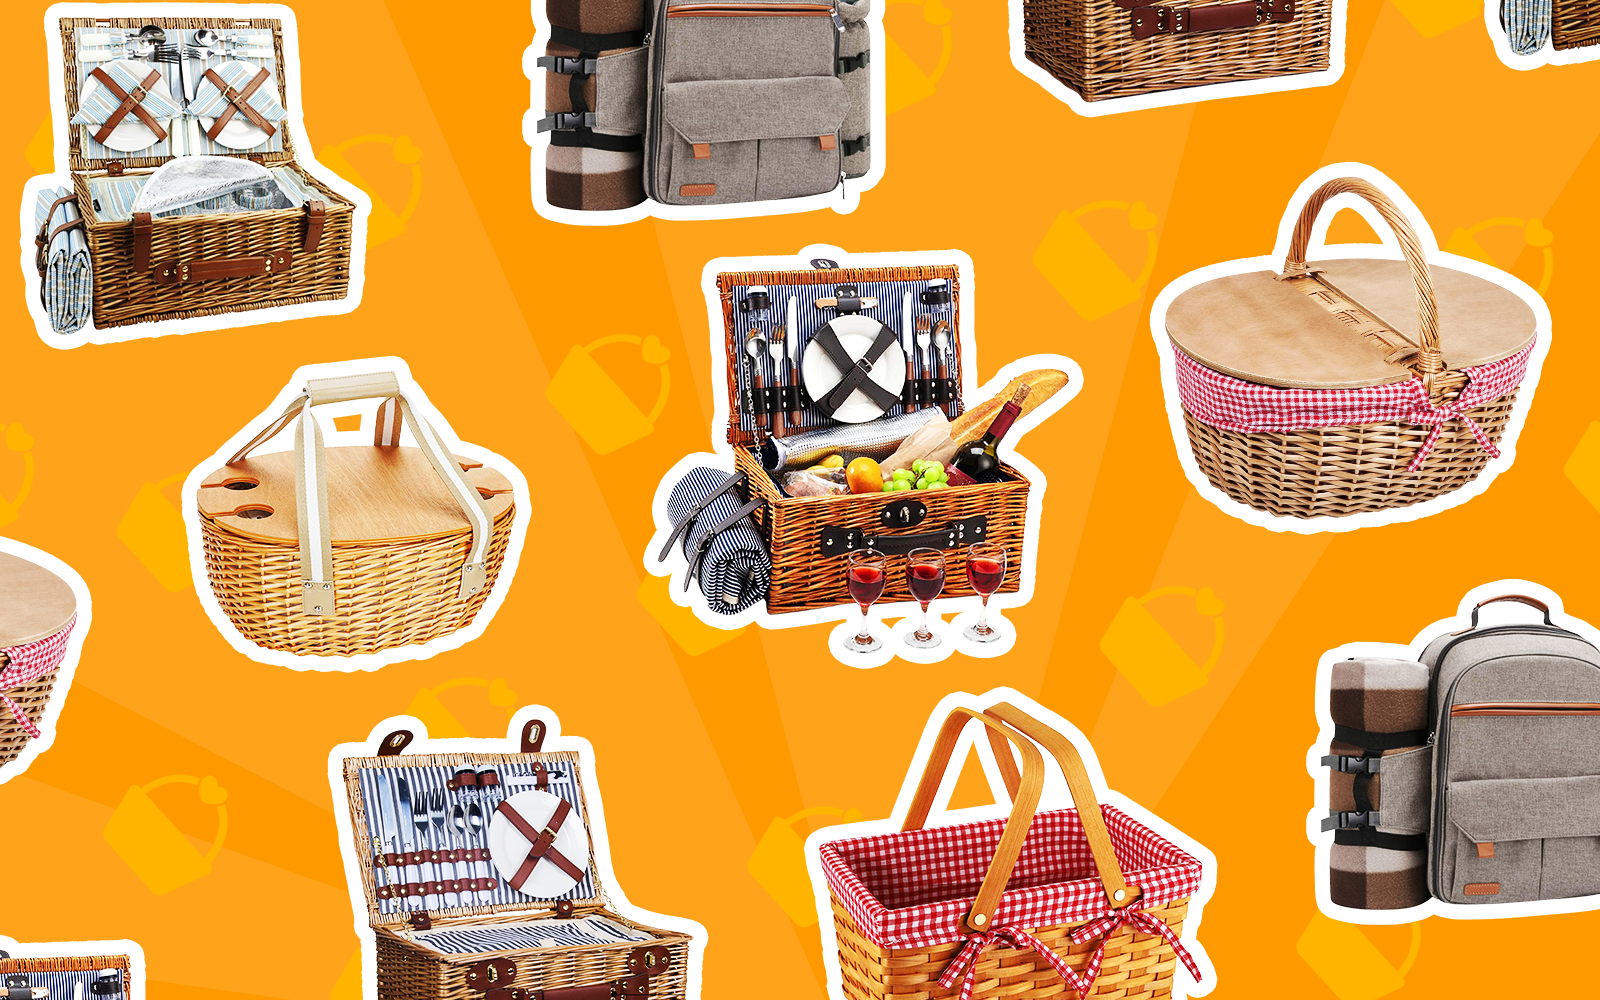 The 7 Best Picnic Baskets in 2022